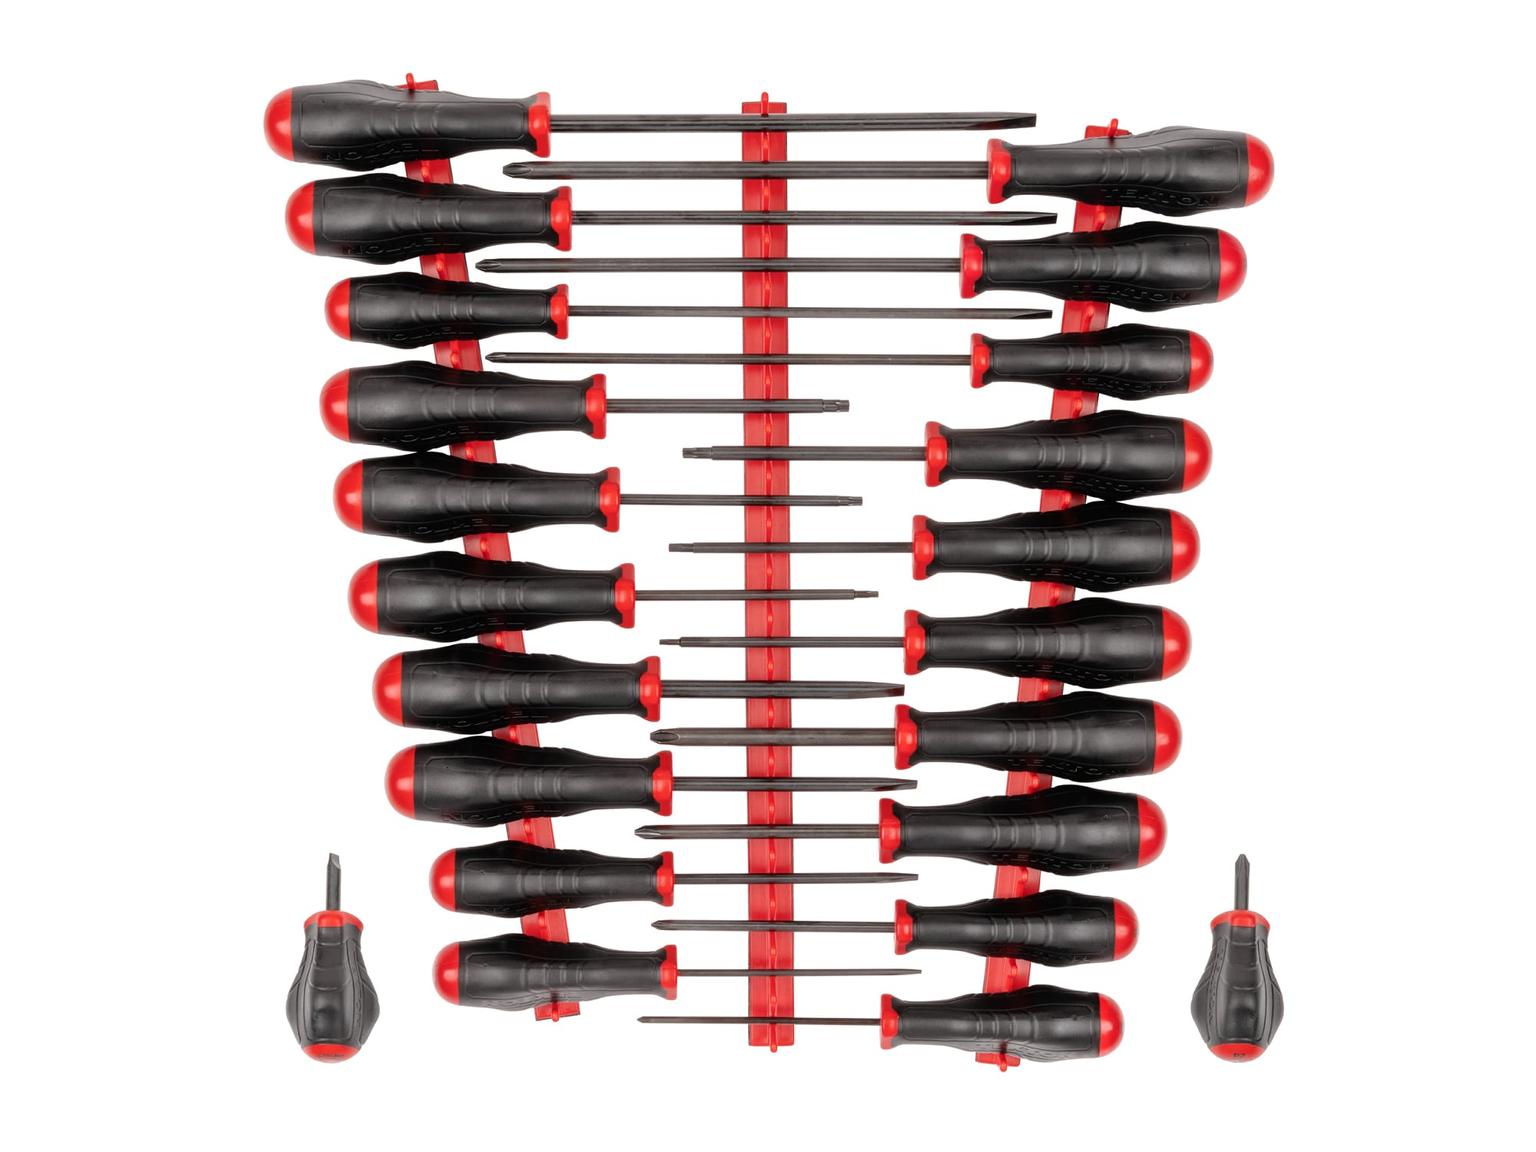 High-Torque Black Oxide Blade Screwdriver Set with Red Rails, 22-Piece (#0-#3, 1/8-5/16 in., T10-30)